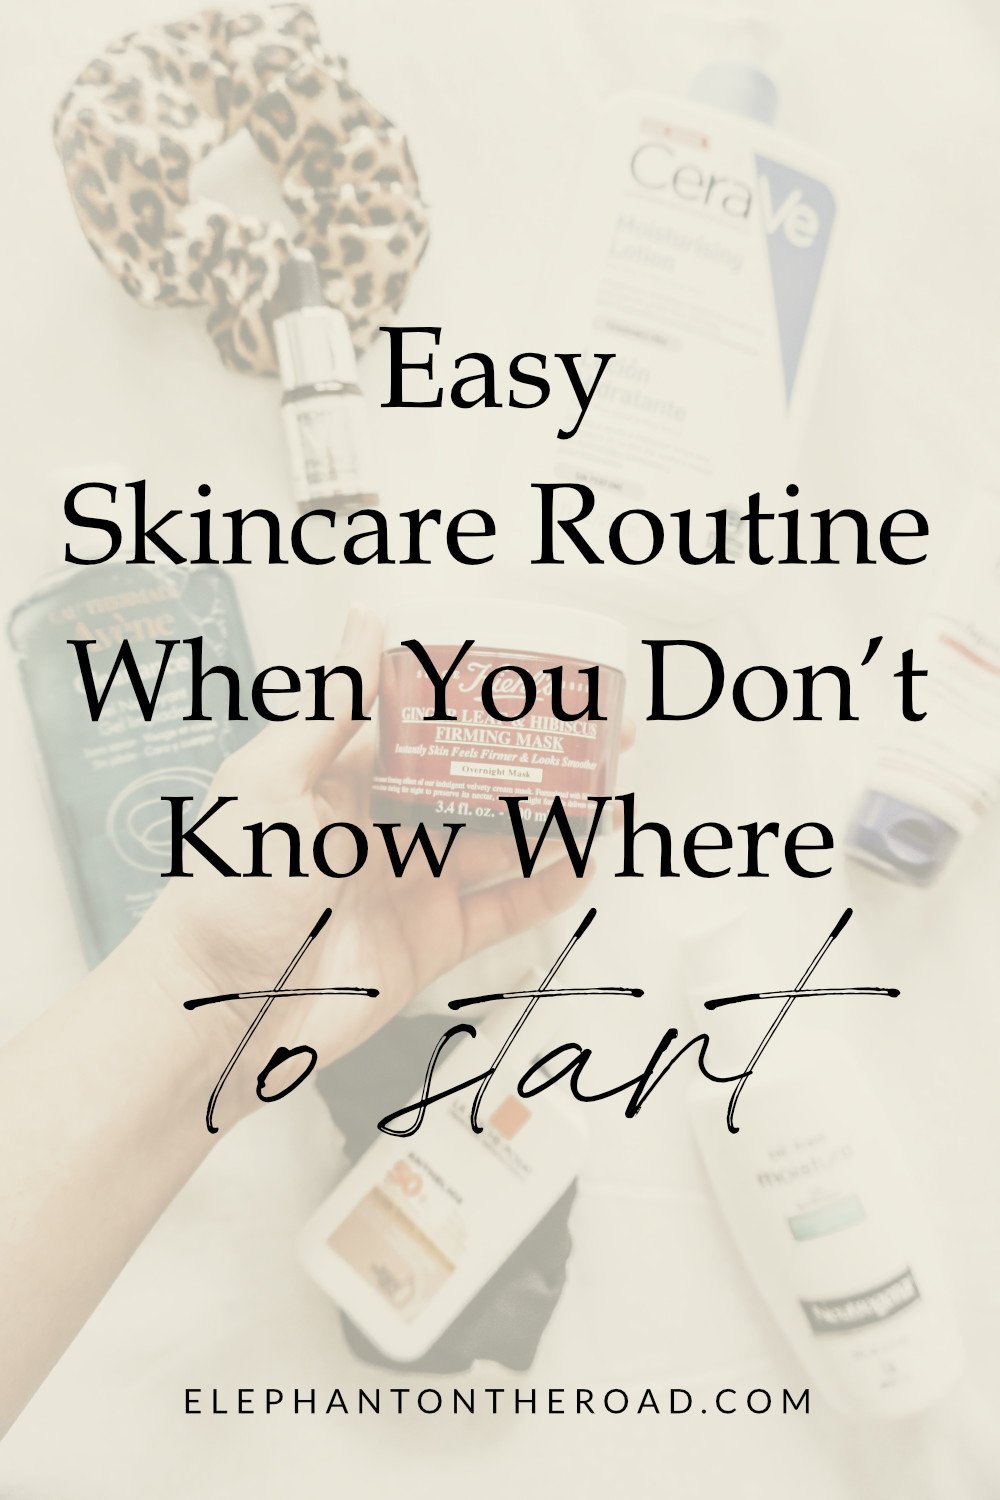 Easy Skincare Routine When You Don’t Know Where To Start. Basic Skincare Routine. How To Build A Skincare Routine. Skincare Routine For Beginners. Morning Skincare Routine For Beginners. Night Skincare Routine For Beginners. Skincare Routine Products. Skincare Routine Right Order. Skincare routine For Oily Skin. Best Order For Skincare Products. Skincare Routine Steps. Elephant on the Road.